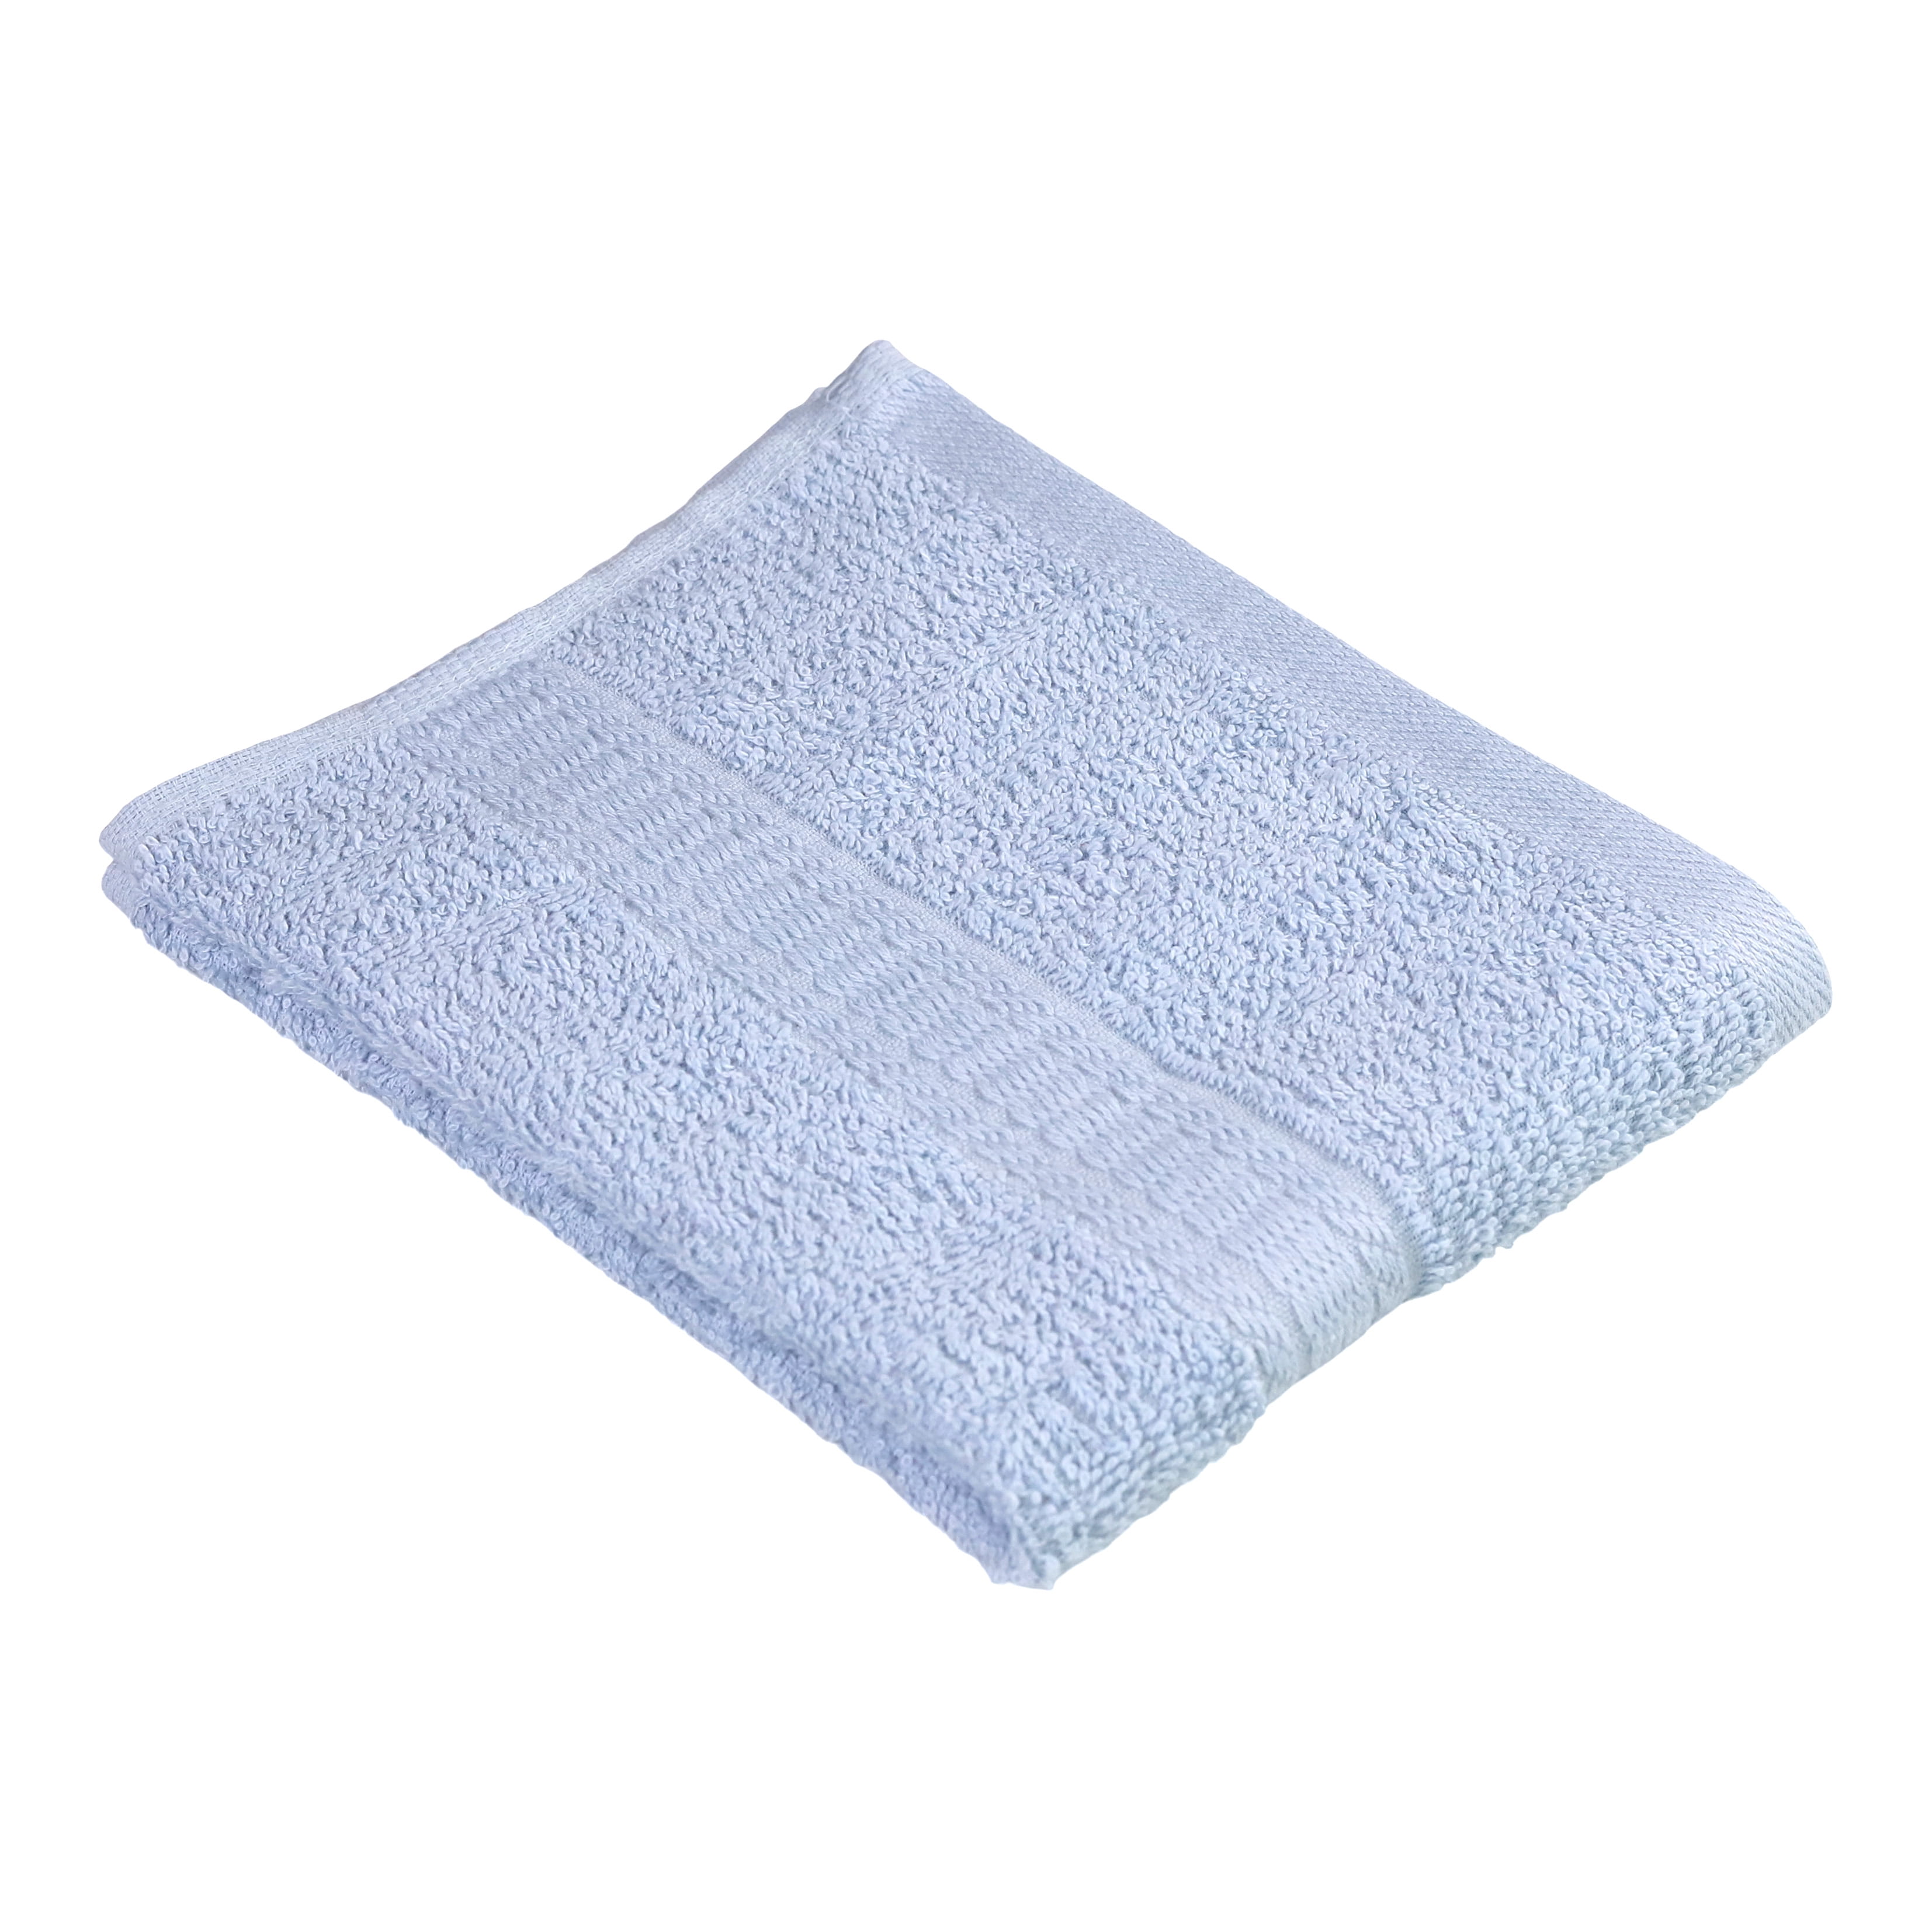 Centex Manchester Mills Hand Towels White/Blue 12 Pack 40 x 19